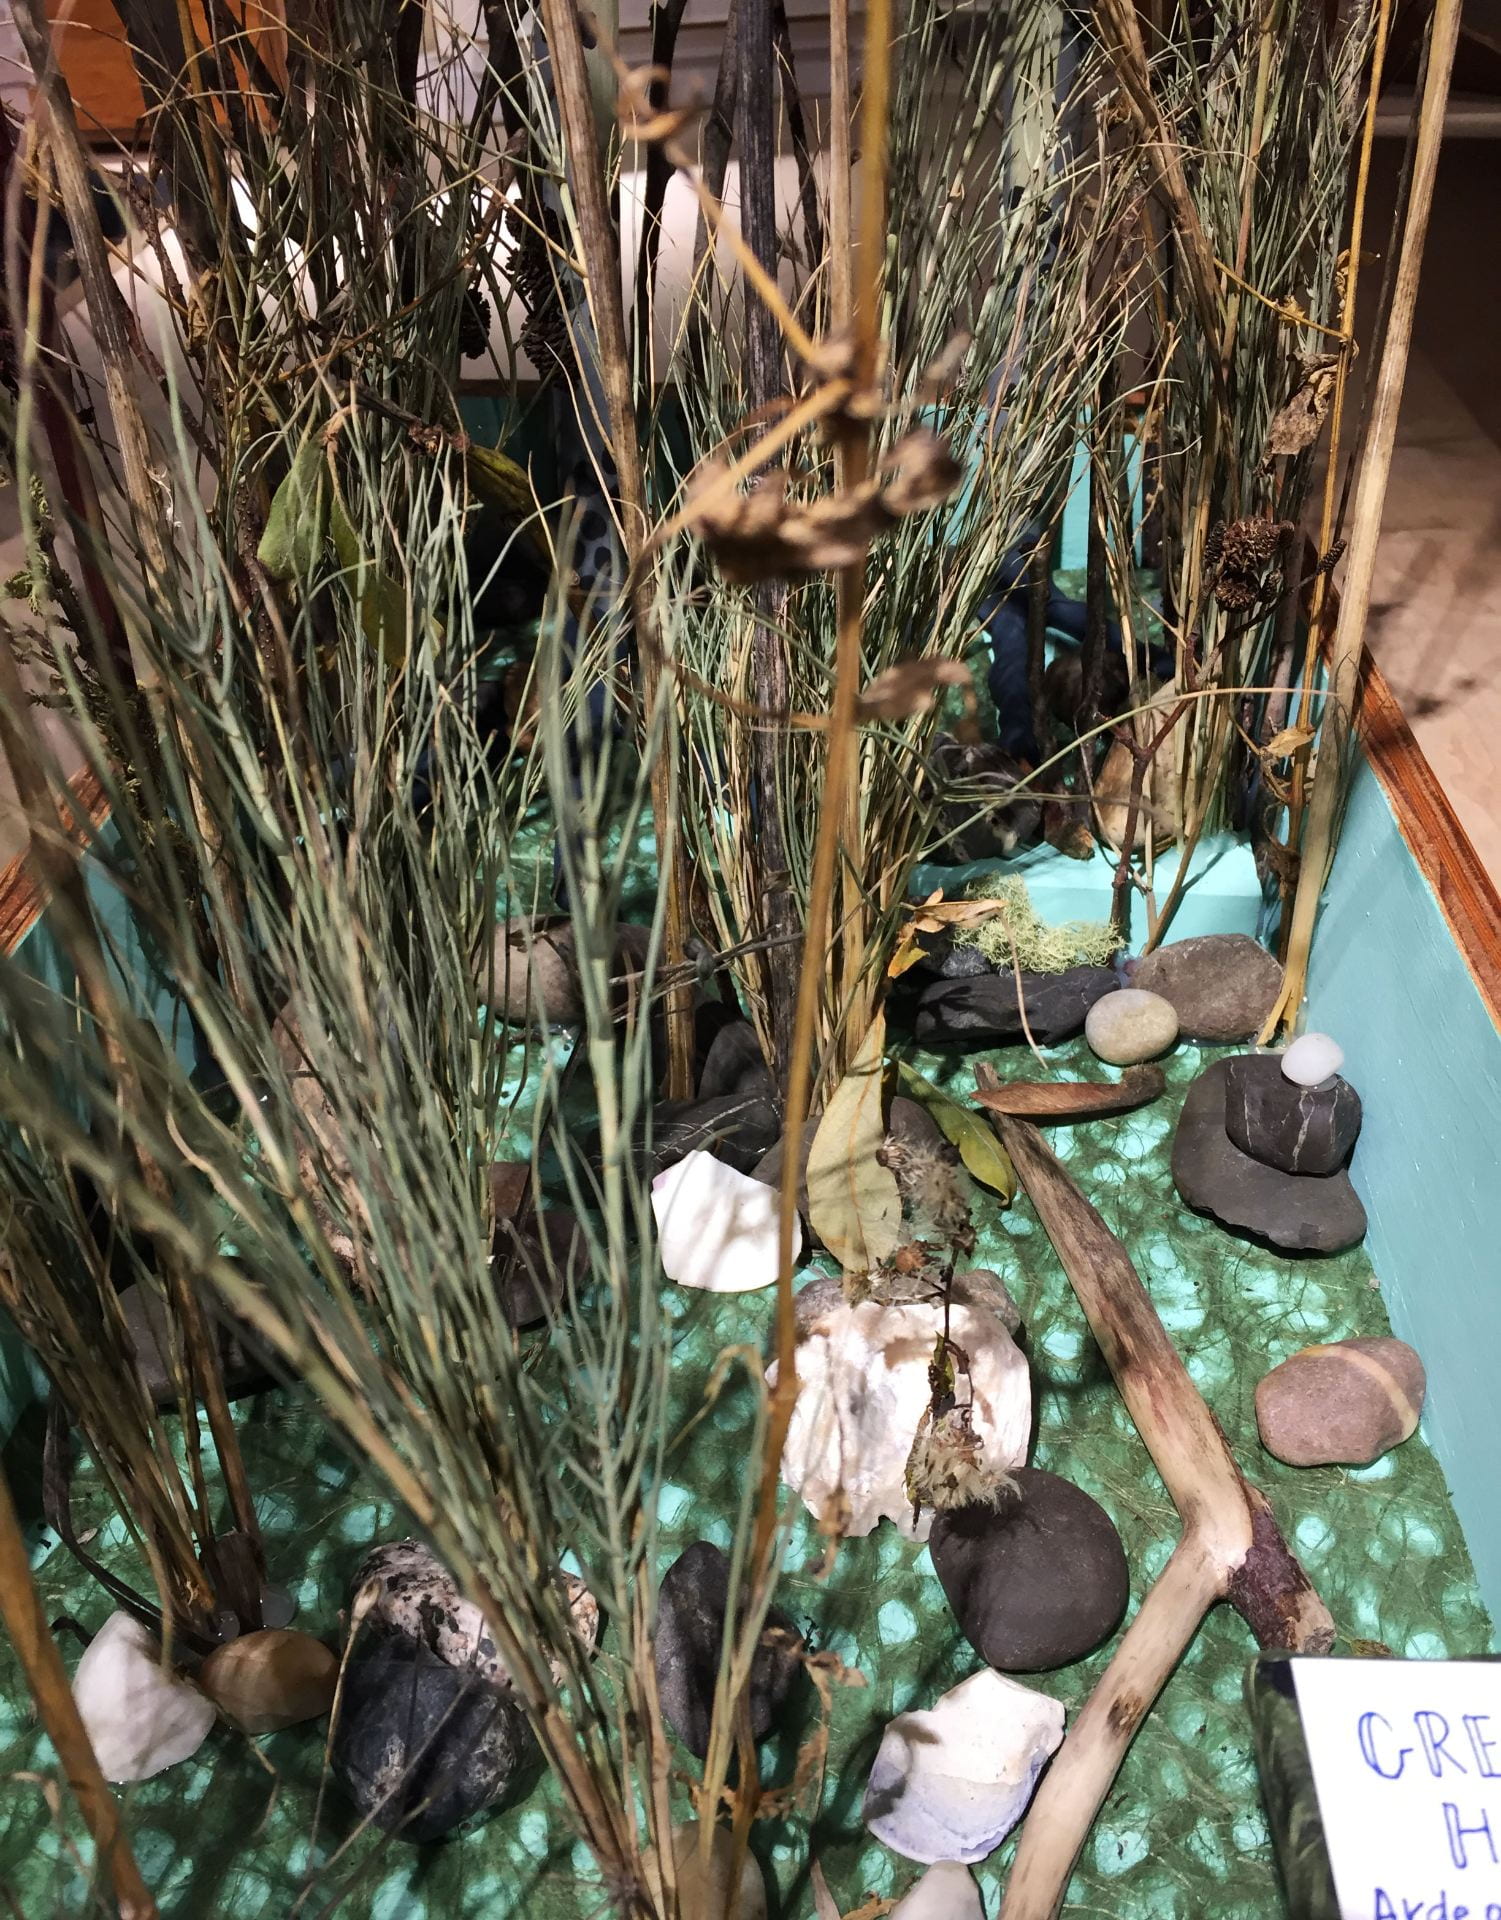 rocks and shells interspersed between dried grass in a display on a table